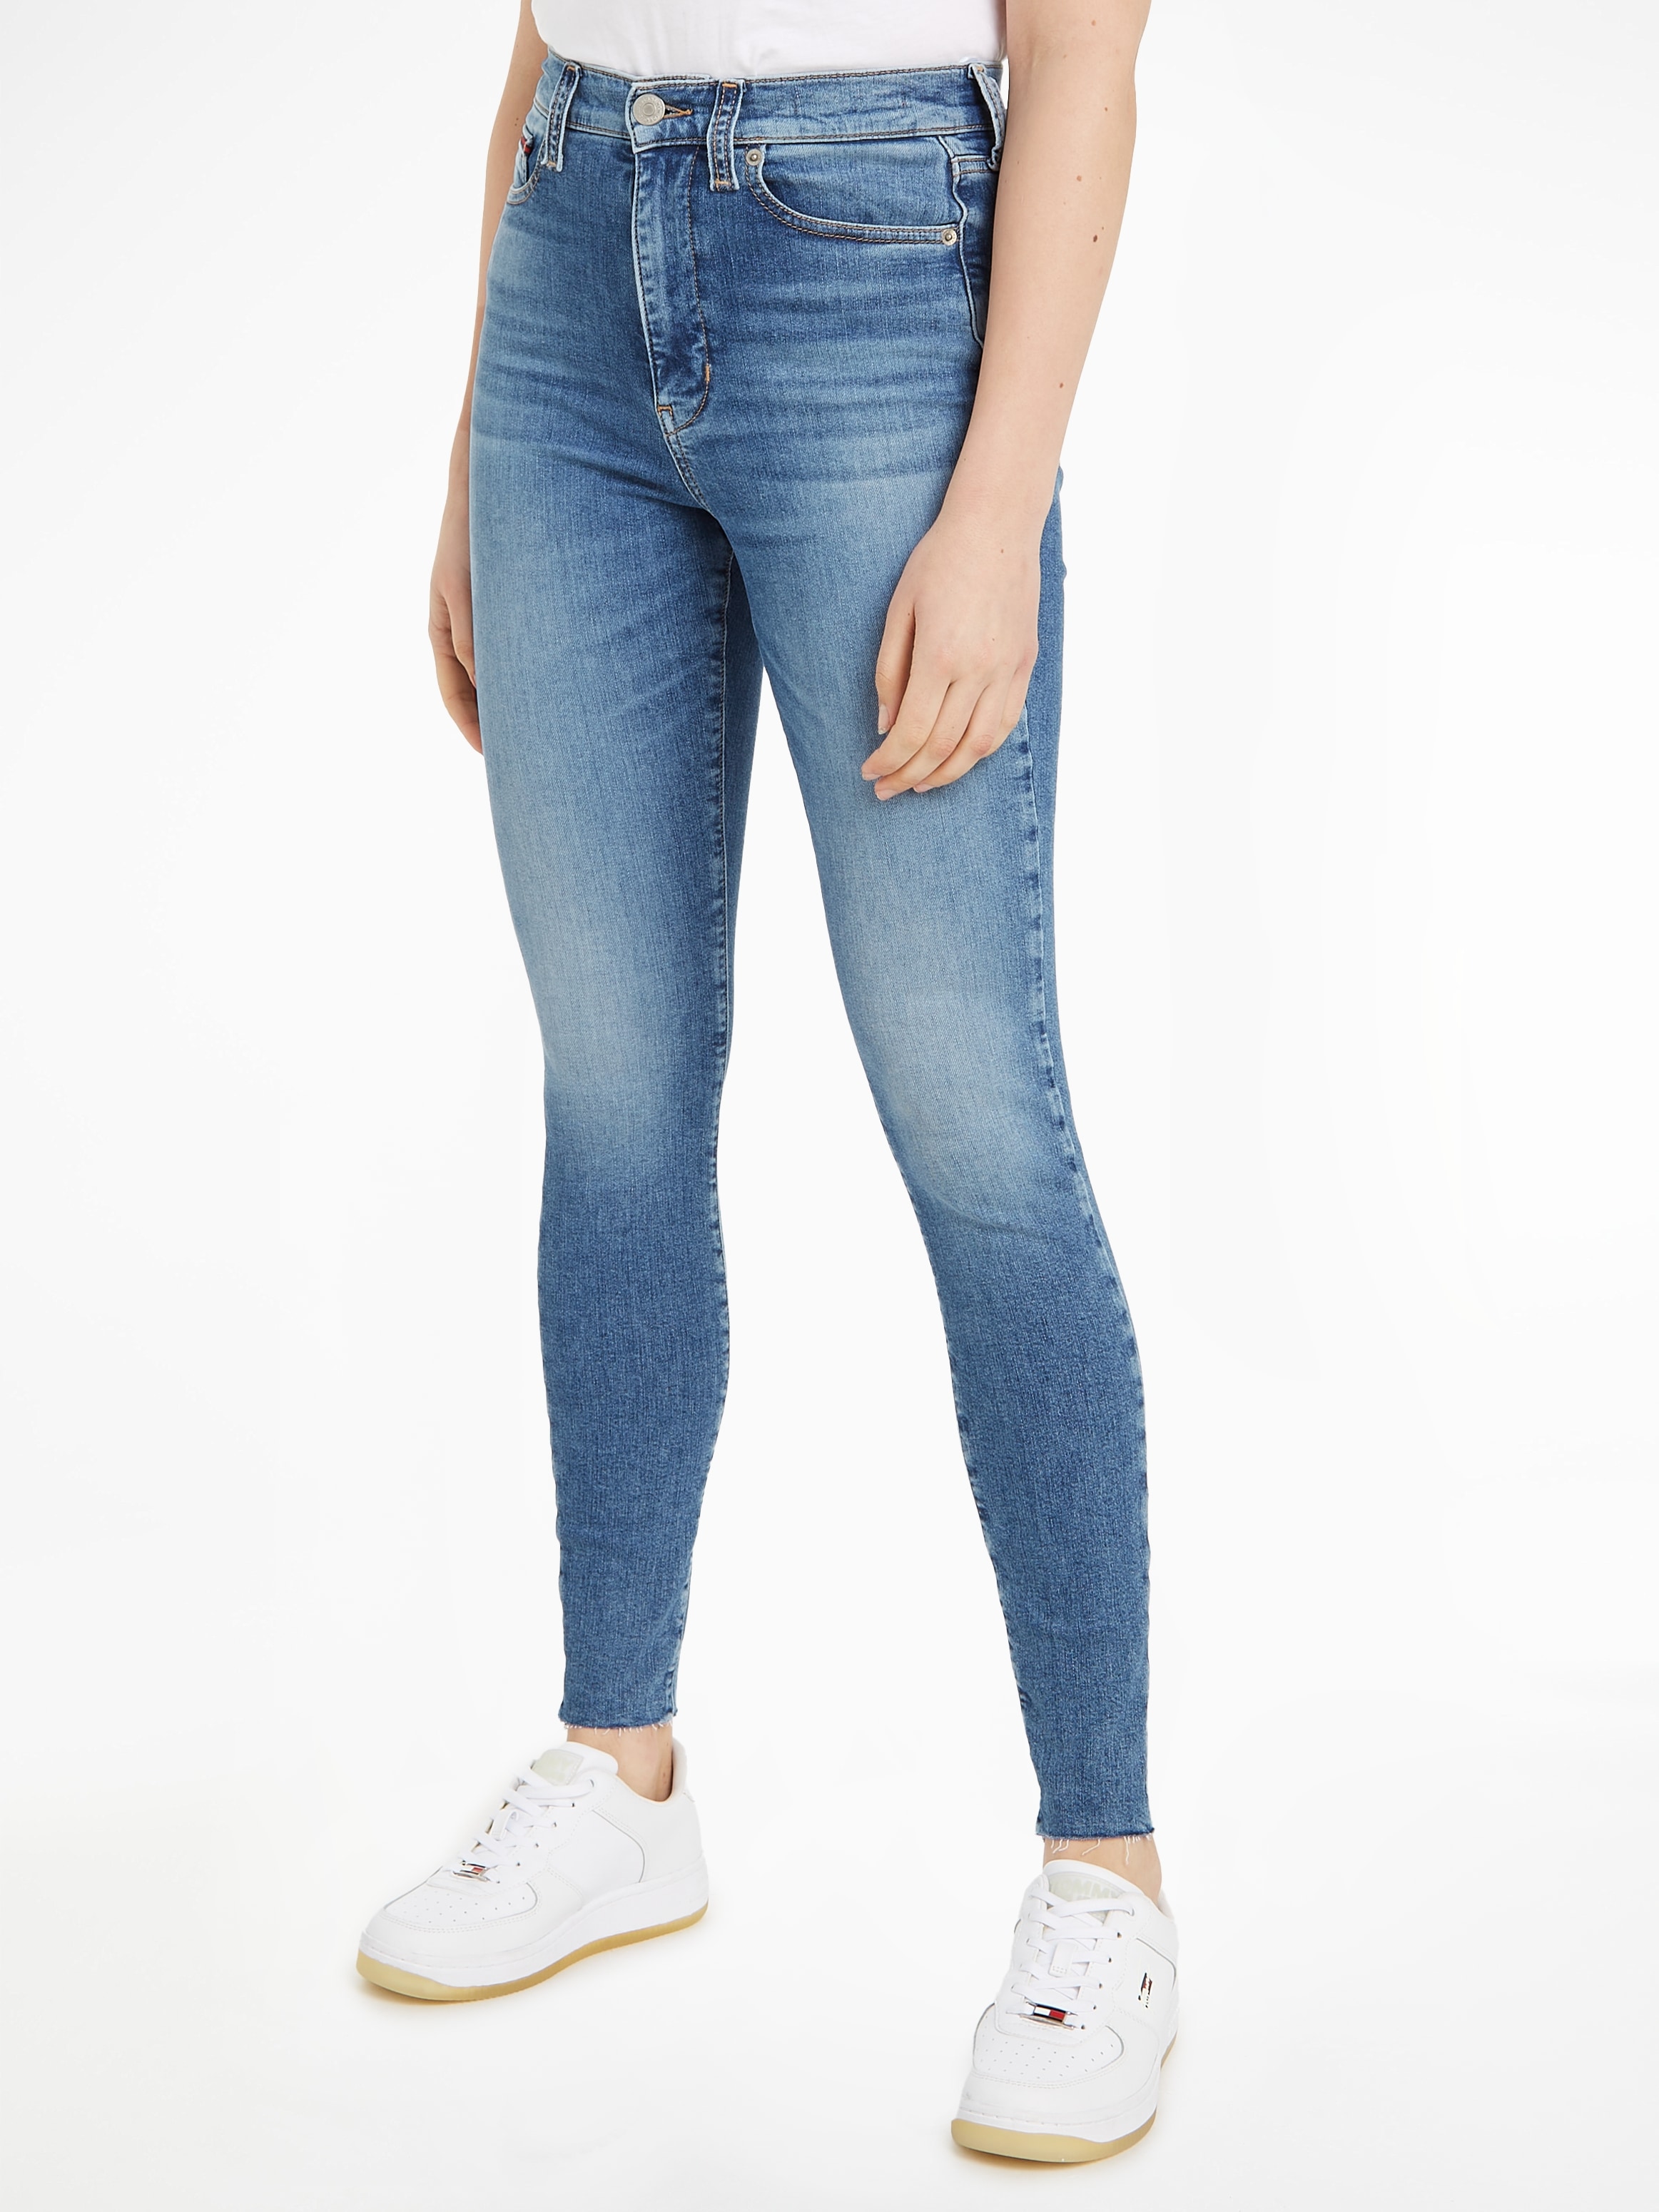 Tommy Jeans Skinny-fit-Jeans »Jeans HR SSKN CG4«, mit Labelflags shoppen und Logobadge SYLVIA I\'m walking 